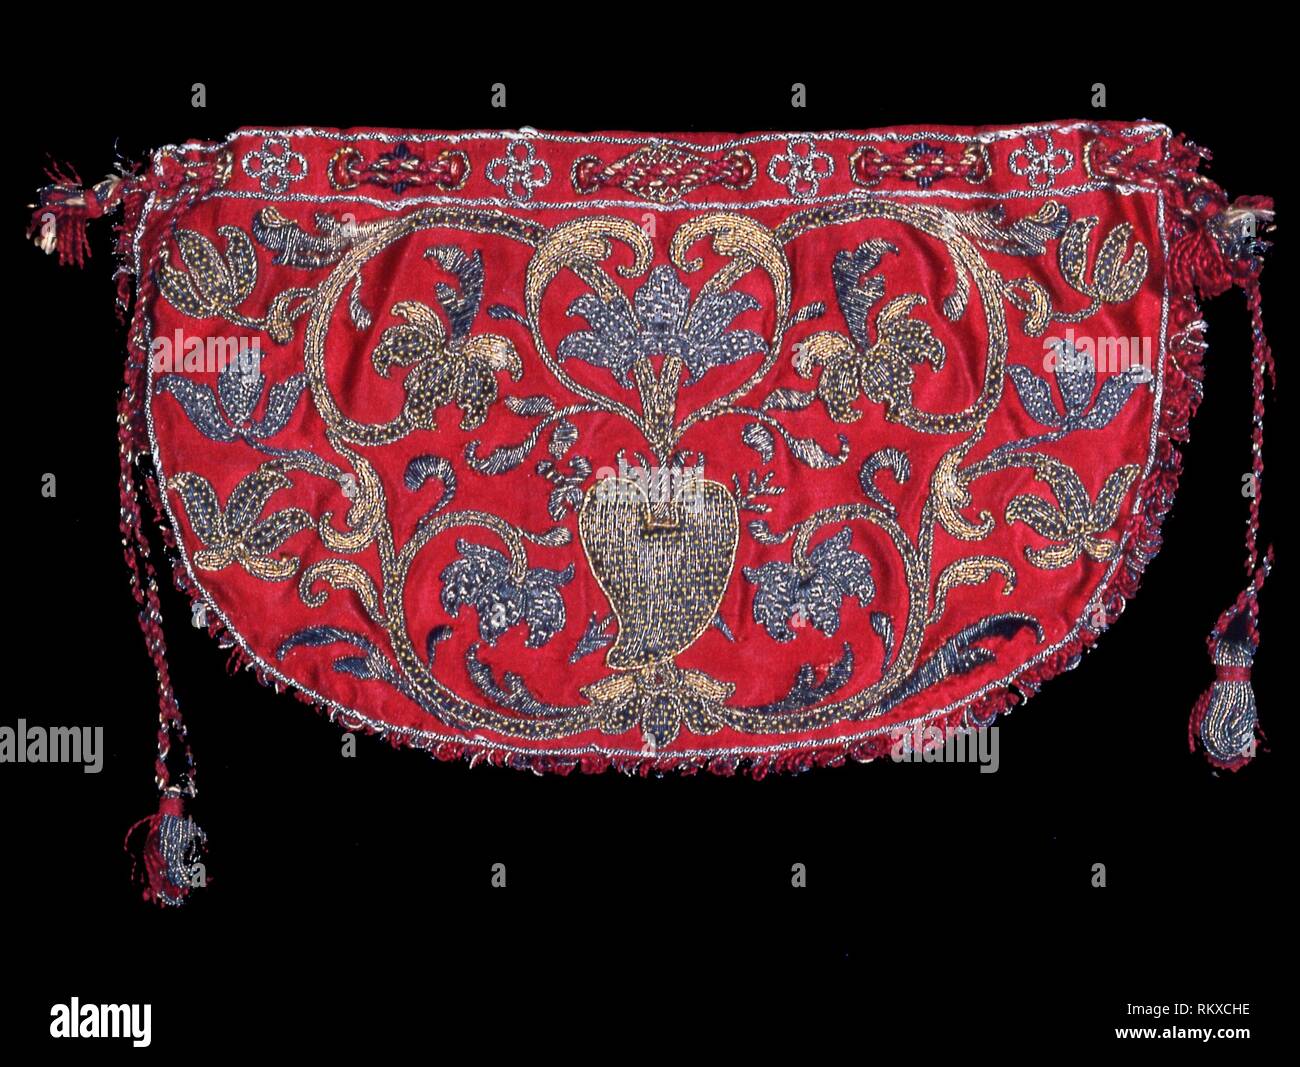 Bag - 17th century - England - Origin: England, Date: 1601-1700, Medium: Silk, weft-float faced satin weave; embroidered in silk threads and gilt Stock Photo